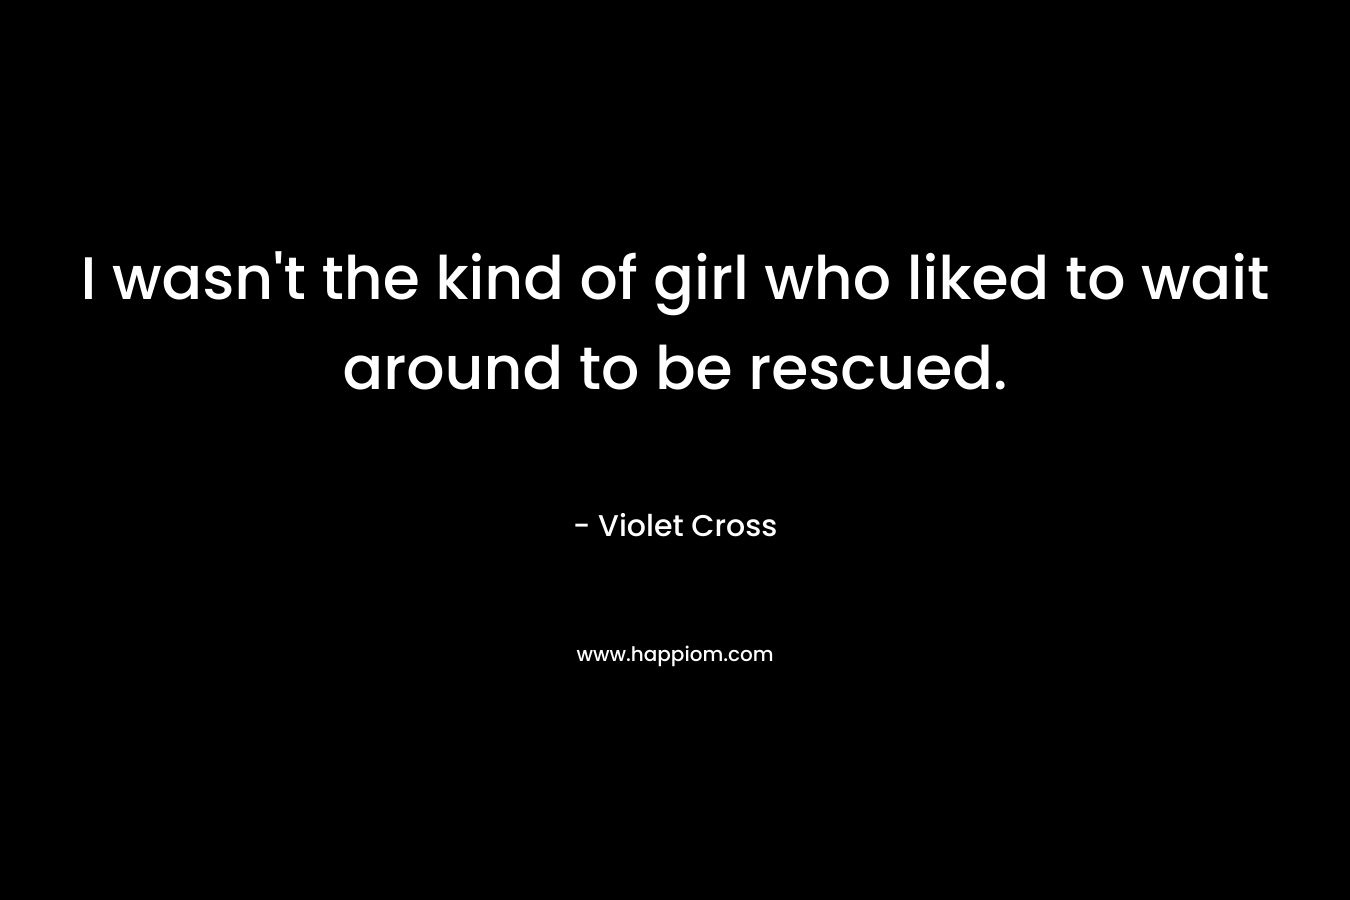 I wasn't the kind of girl who liked to wait around to be rescued.